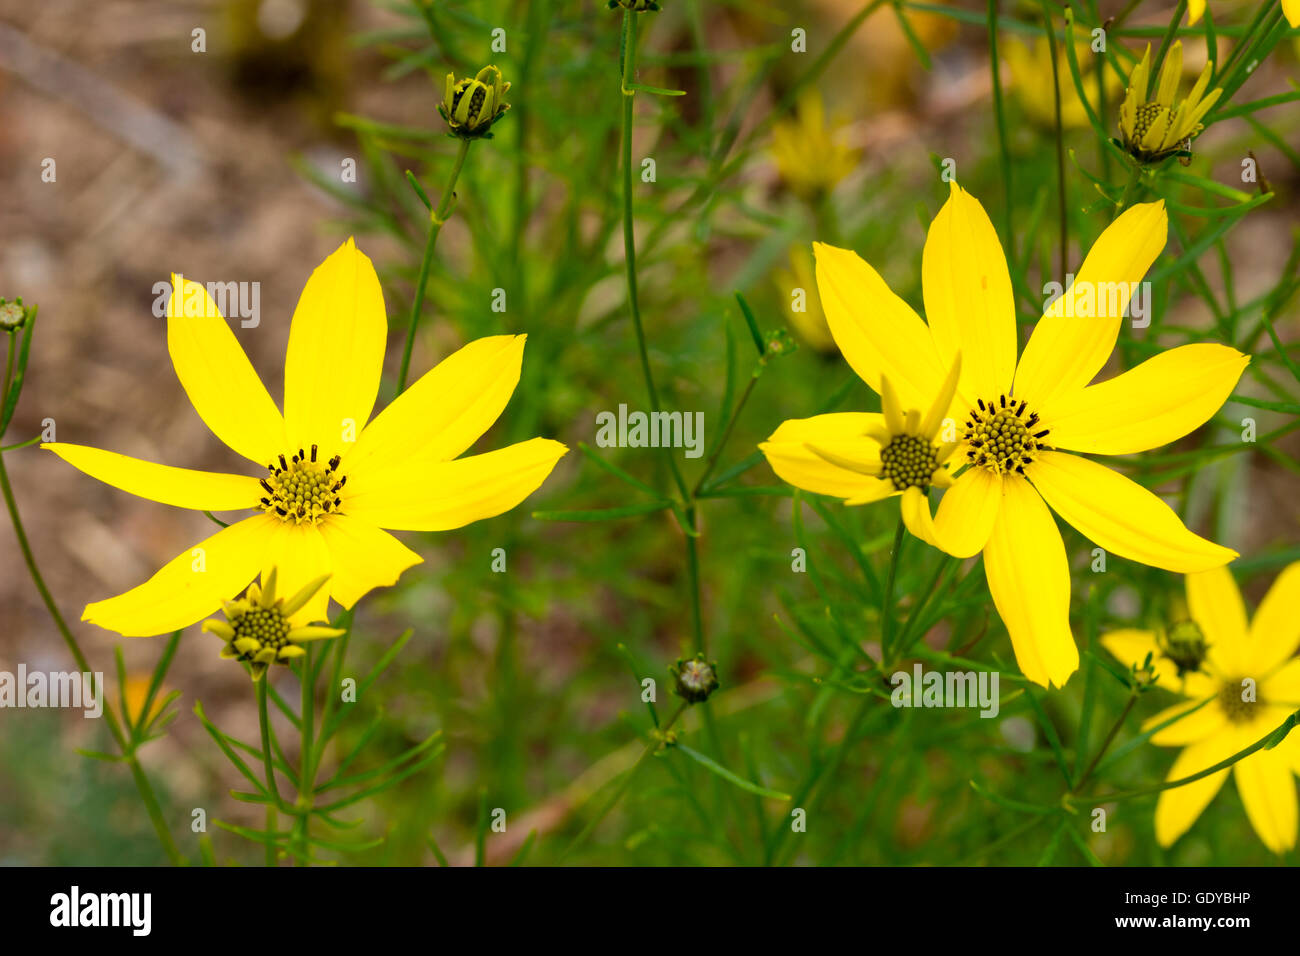 Close up of the yellow daisy flowers of tickseed, Coreopsis verticillata Stock Photo